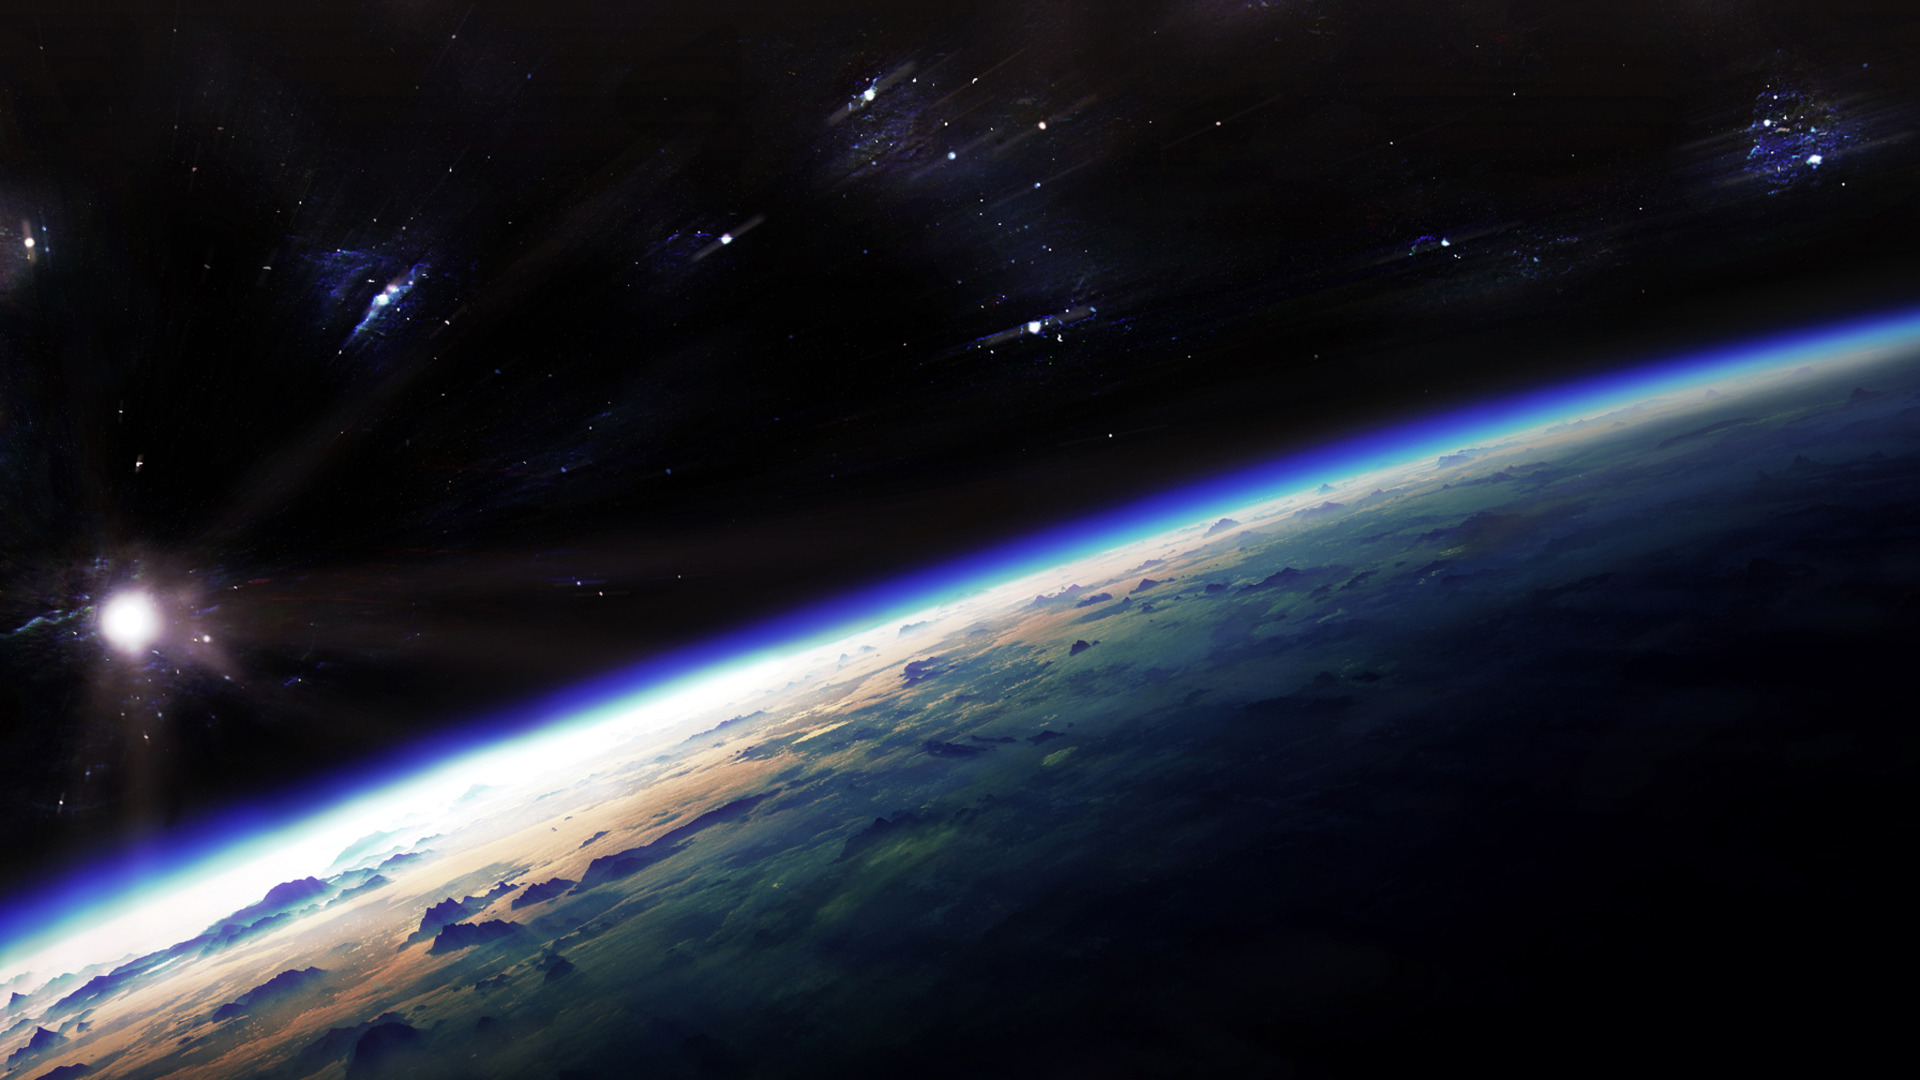 From Space Hd Wallpaper Background Image 1920x1080 Id 80316